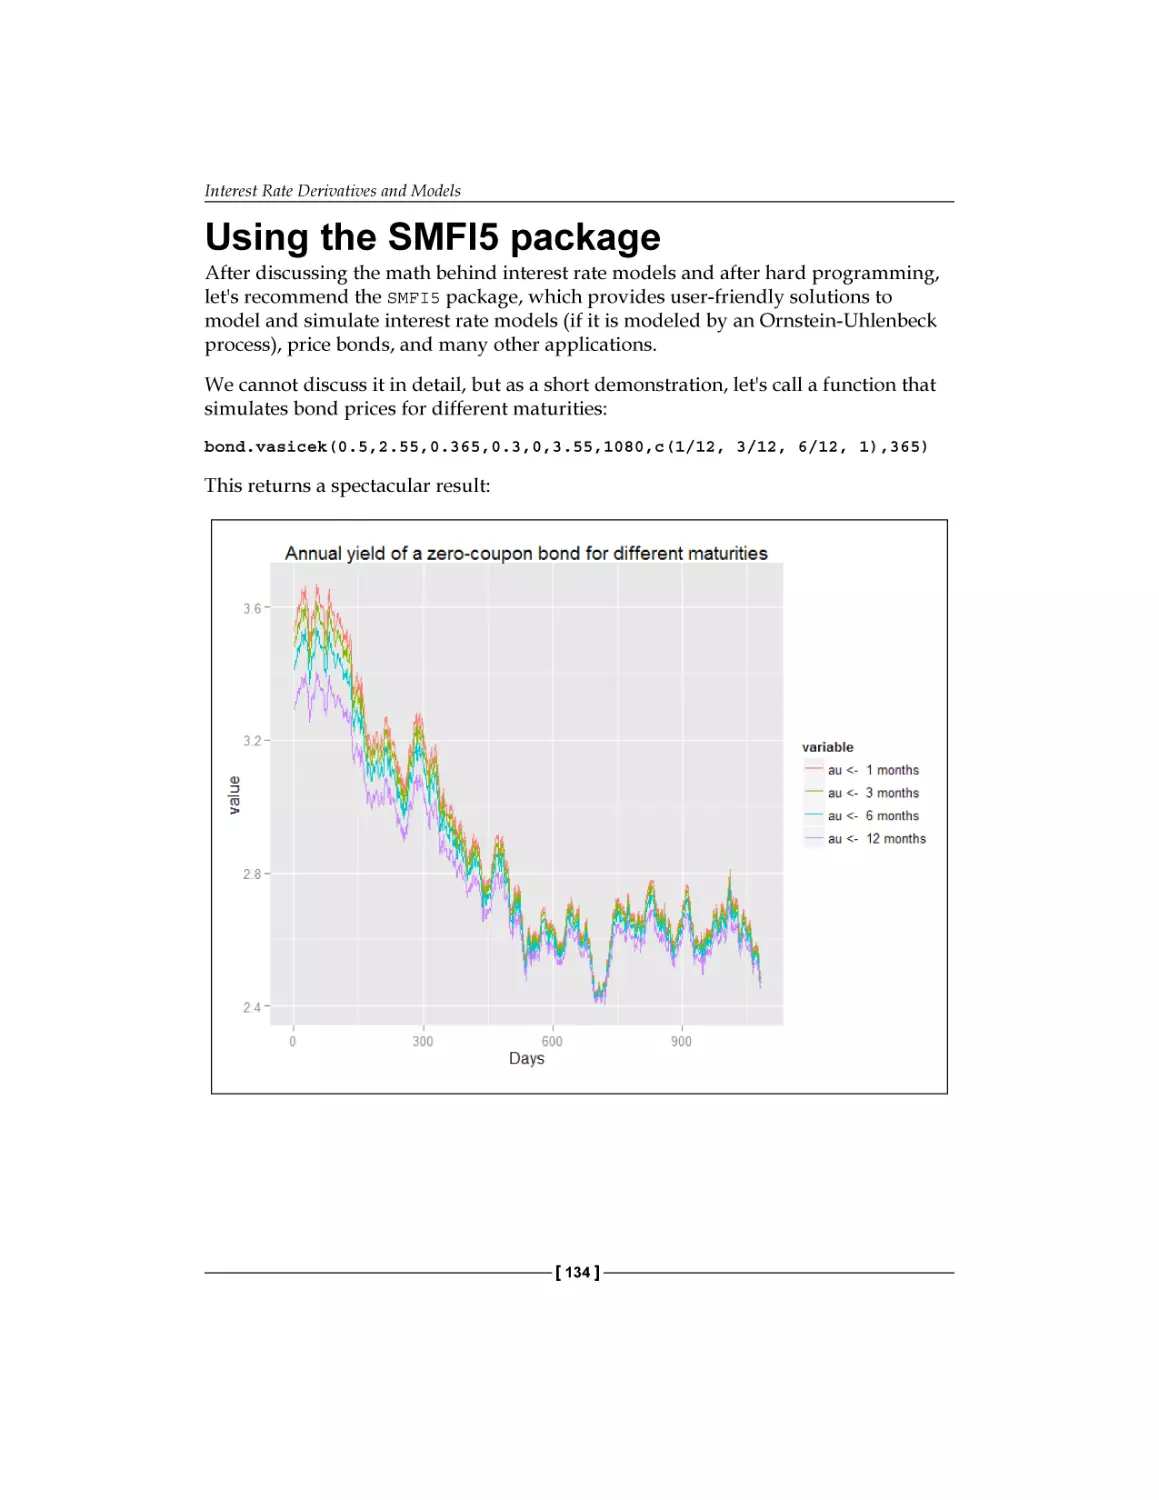 Using the SMFI5 package